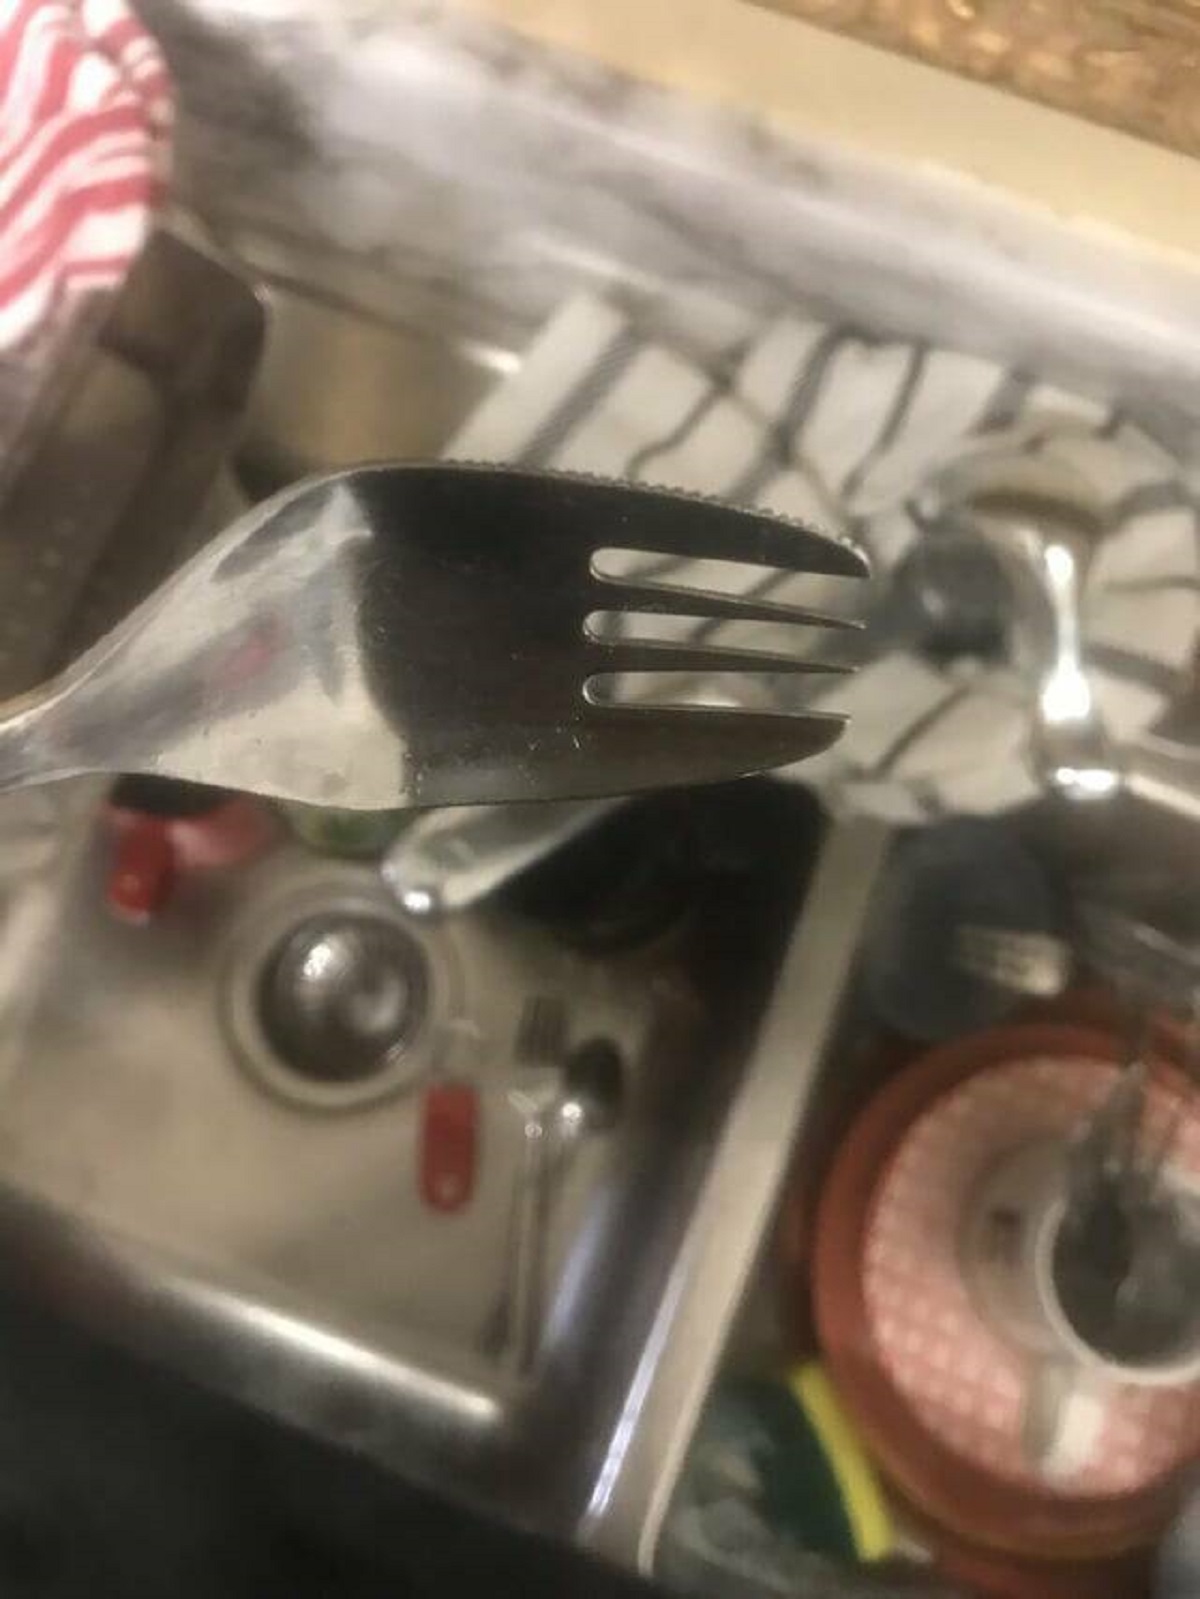 "I own a combination spoon, knife and fork"